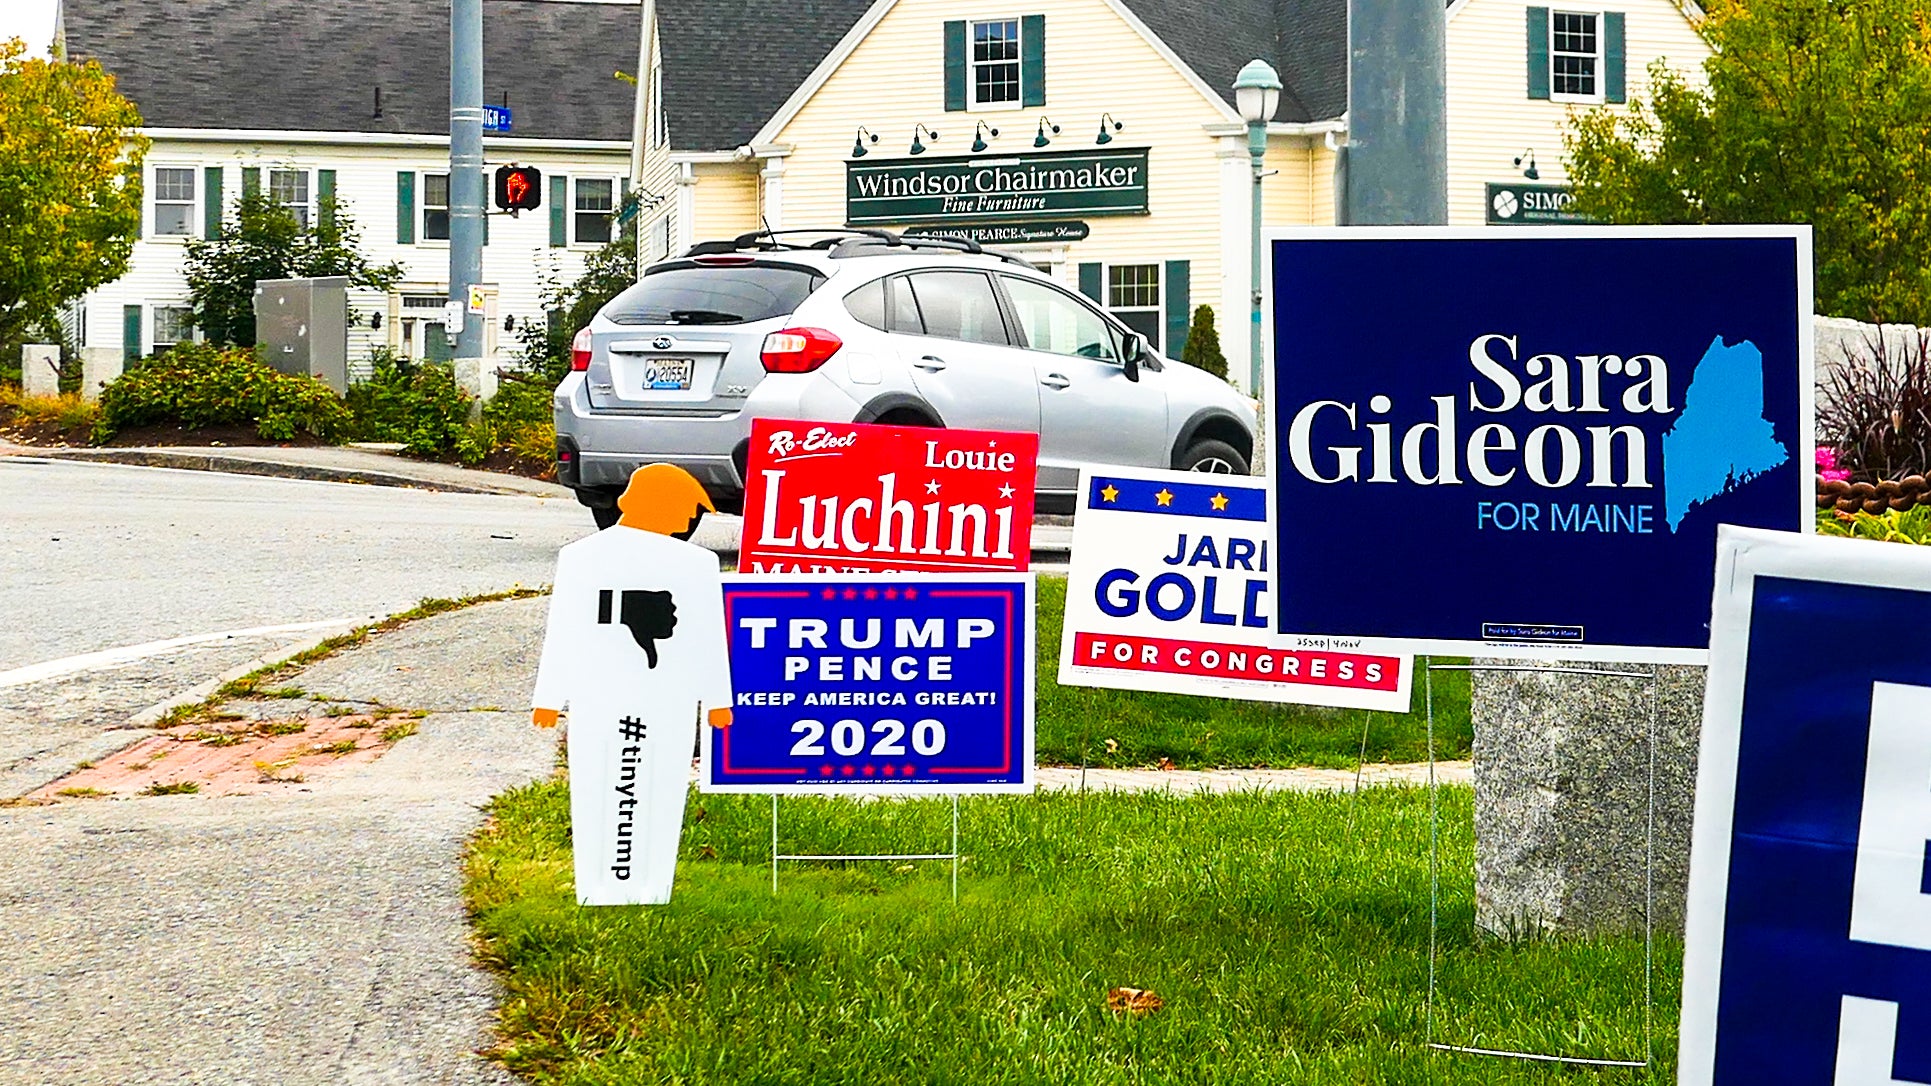 two foot tall tiny trump lawn sign (white coroplast trump cutout with orange head and hands) with a thumbs down sign in the chest standing amidst four other traditional political lawn signs on a street corner